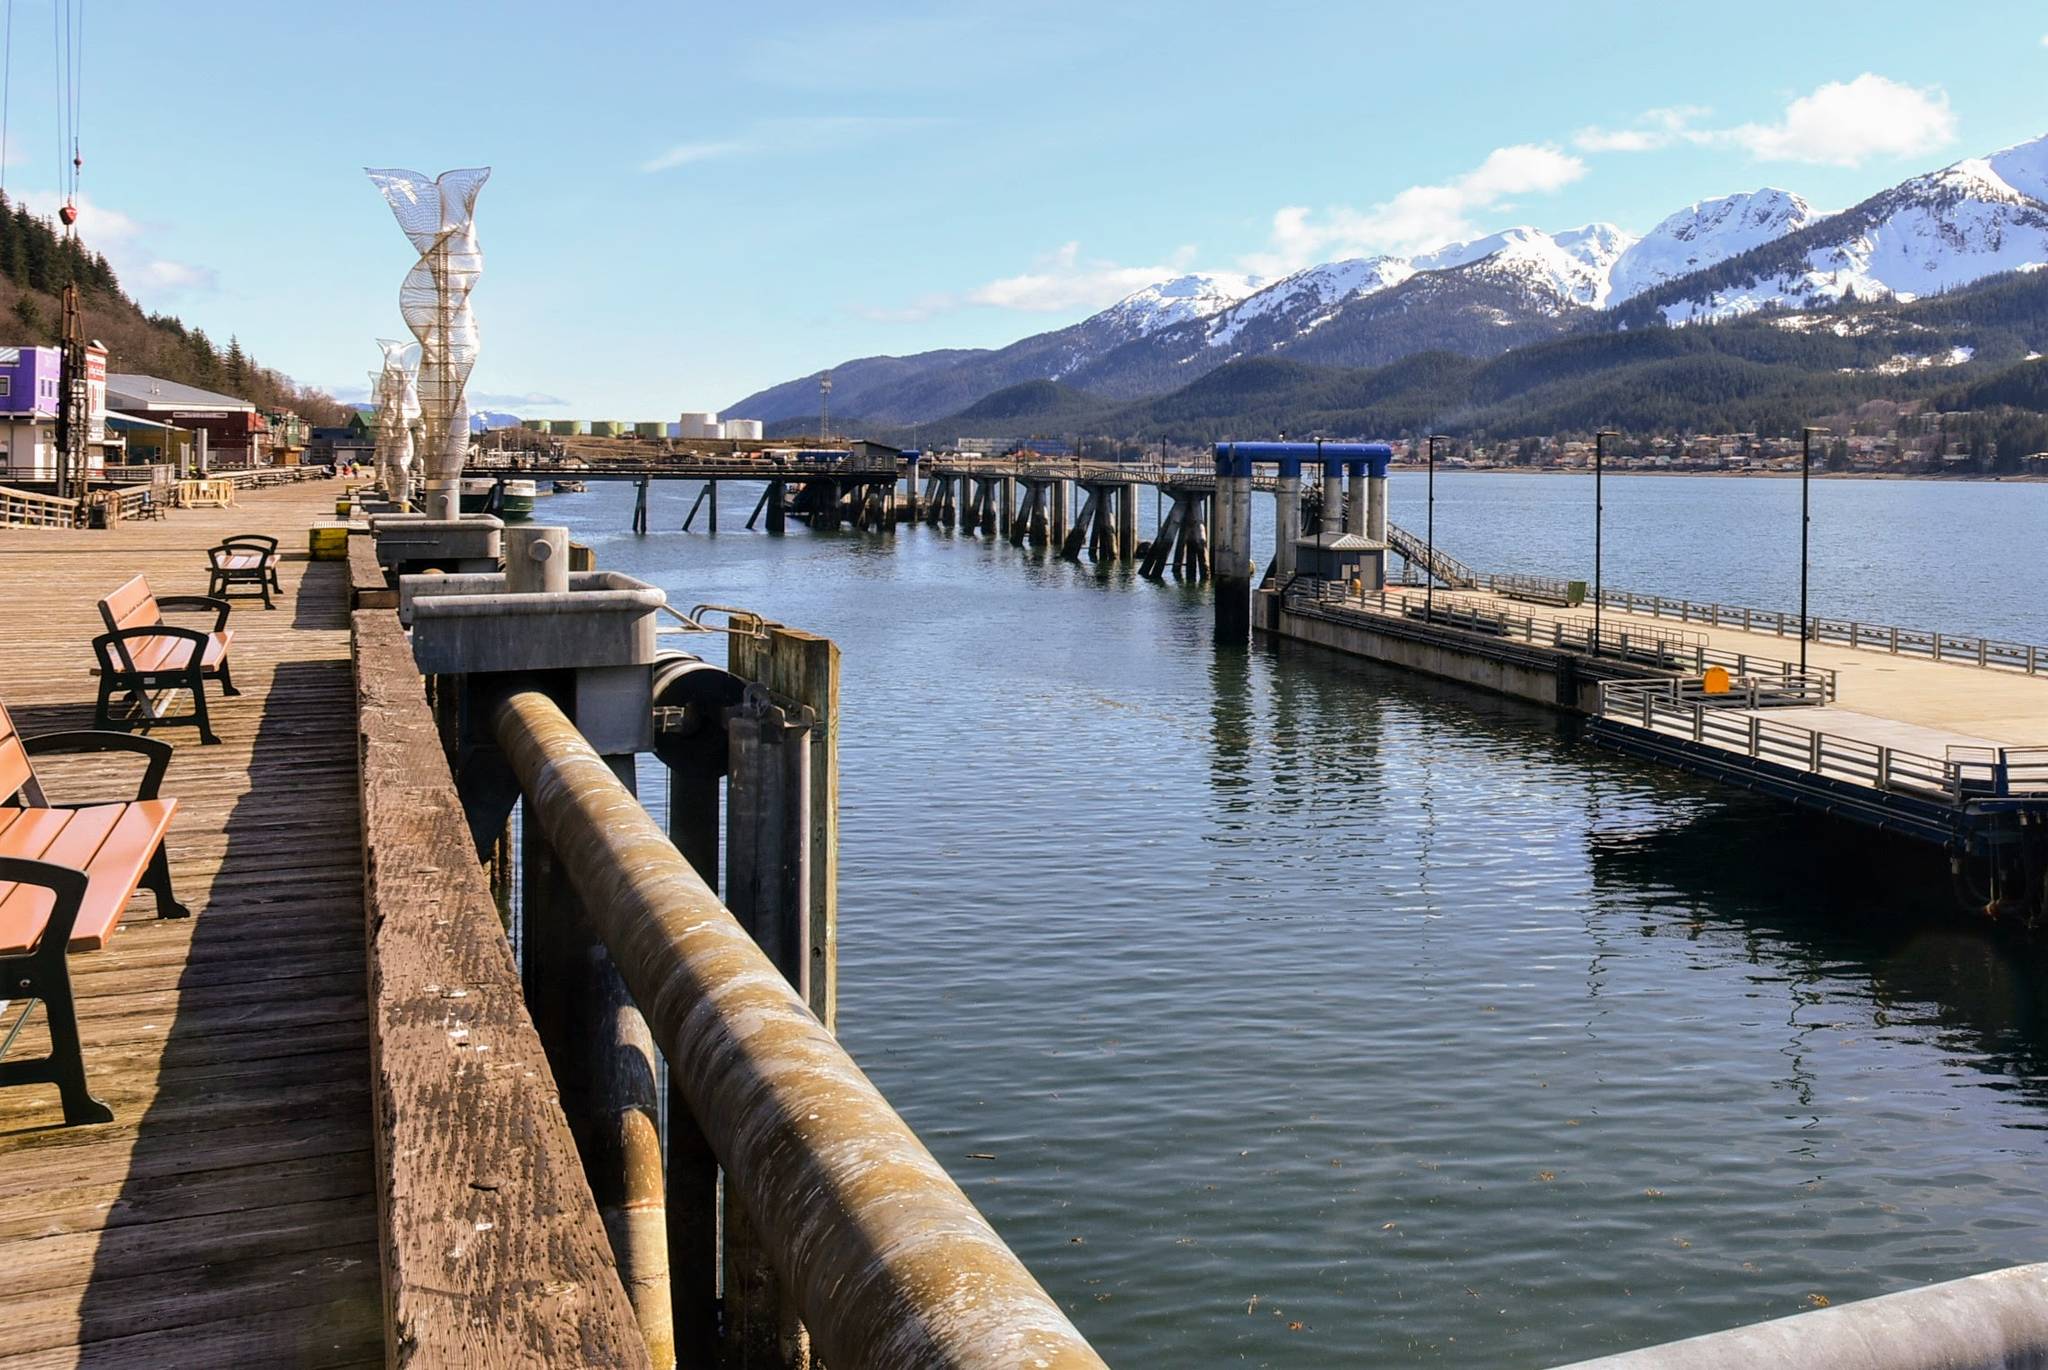 Lack of cruise ships relying on shore power from Alaska Electric Light and Power will not affect customers, said an AELP vice president on June 29, 2020. (Peter Segall | Juneau Empire)